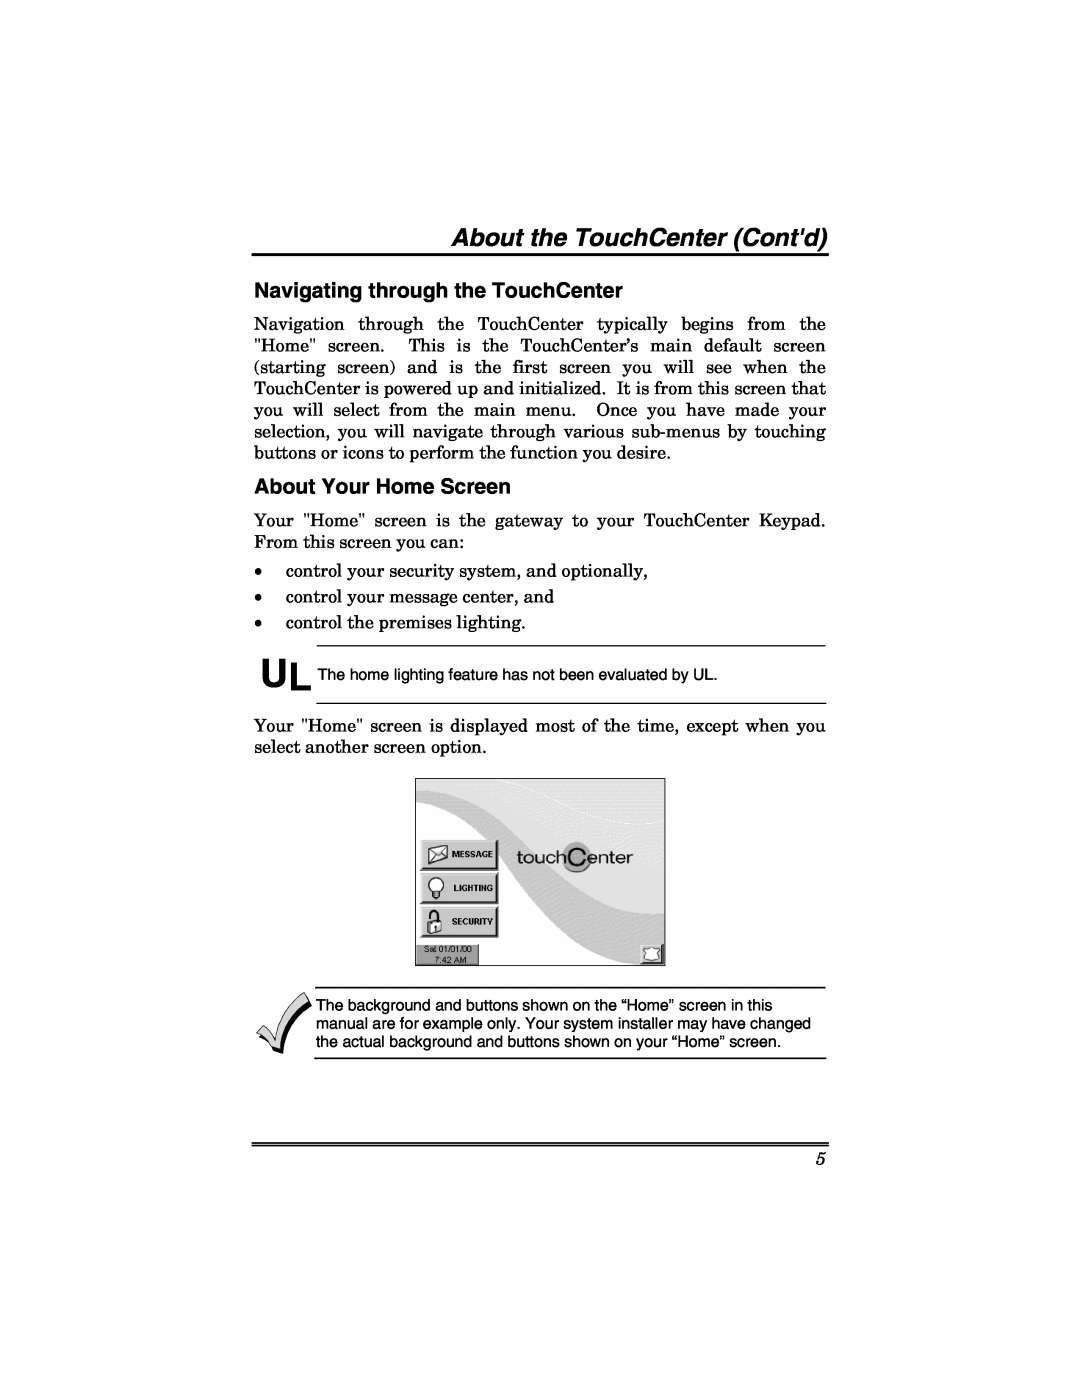 Honeywell 6271V manual About the TouchCenter Contd, Navigating through the TouchCenter, About Your Home Screen 